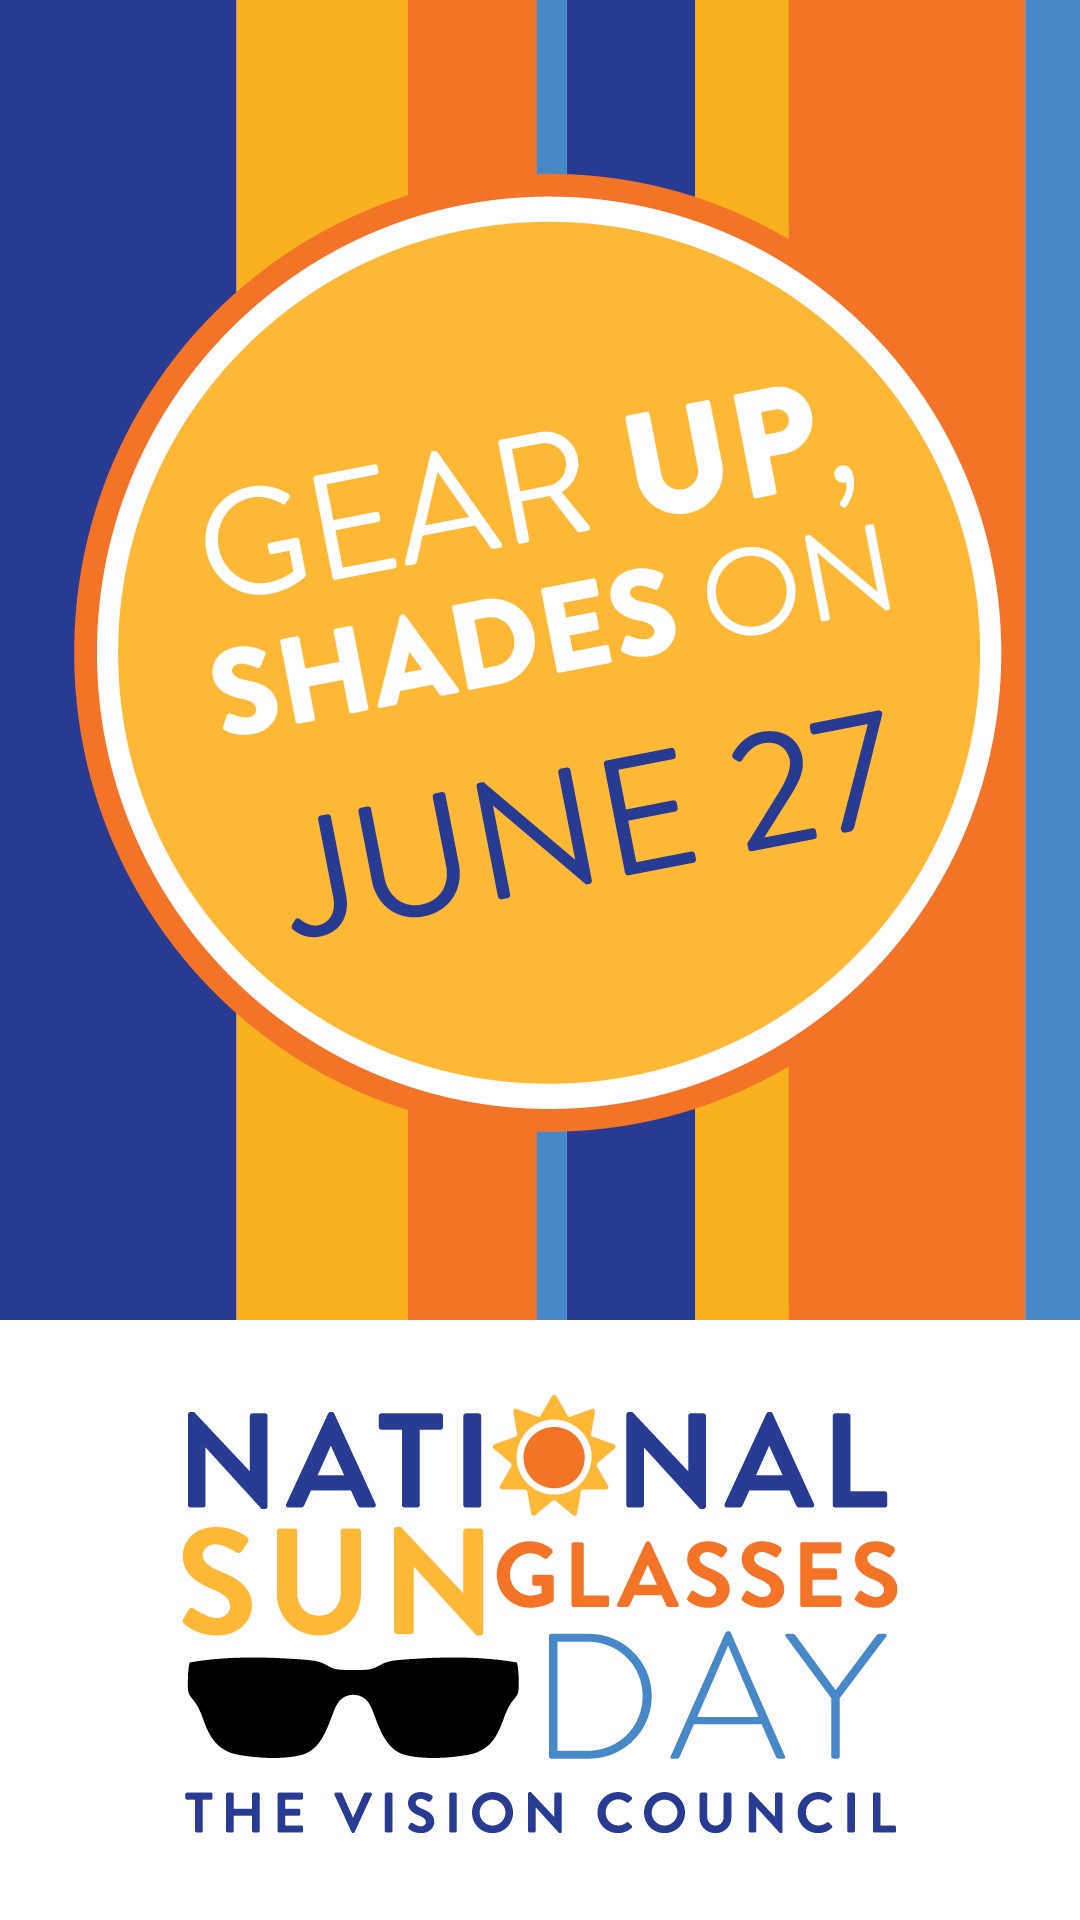 vision council logo for national sunglasses day features hot oranges and blues and says gear up, shades on in a circle in the middle